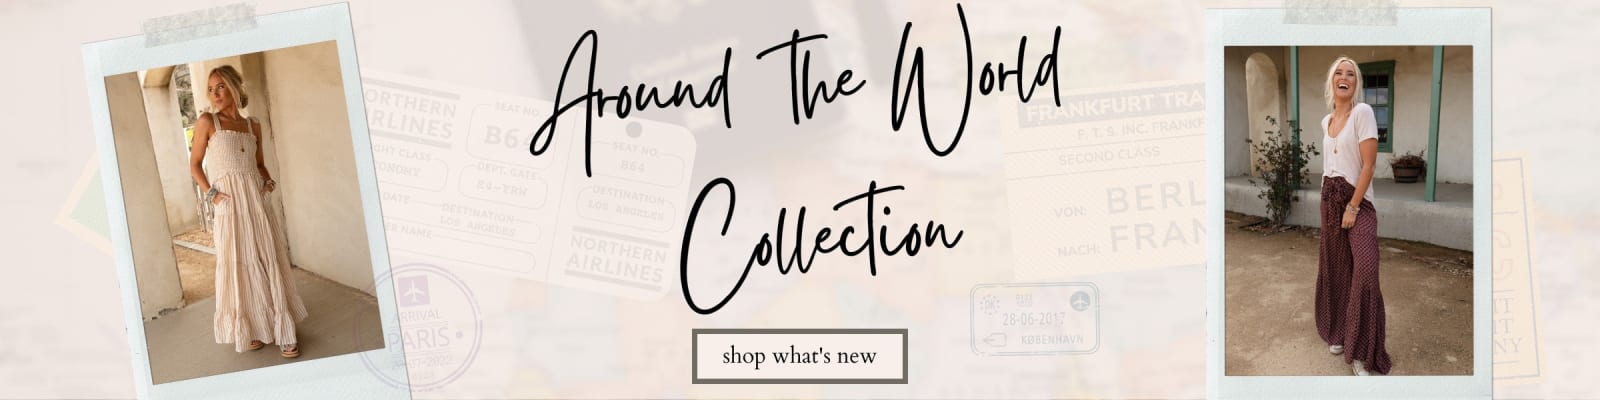 around the world collection